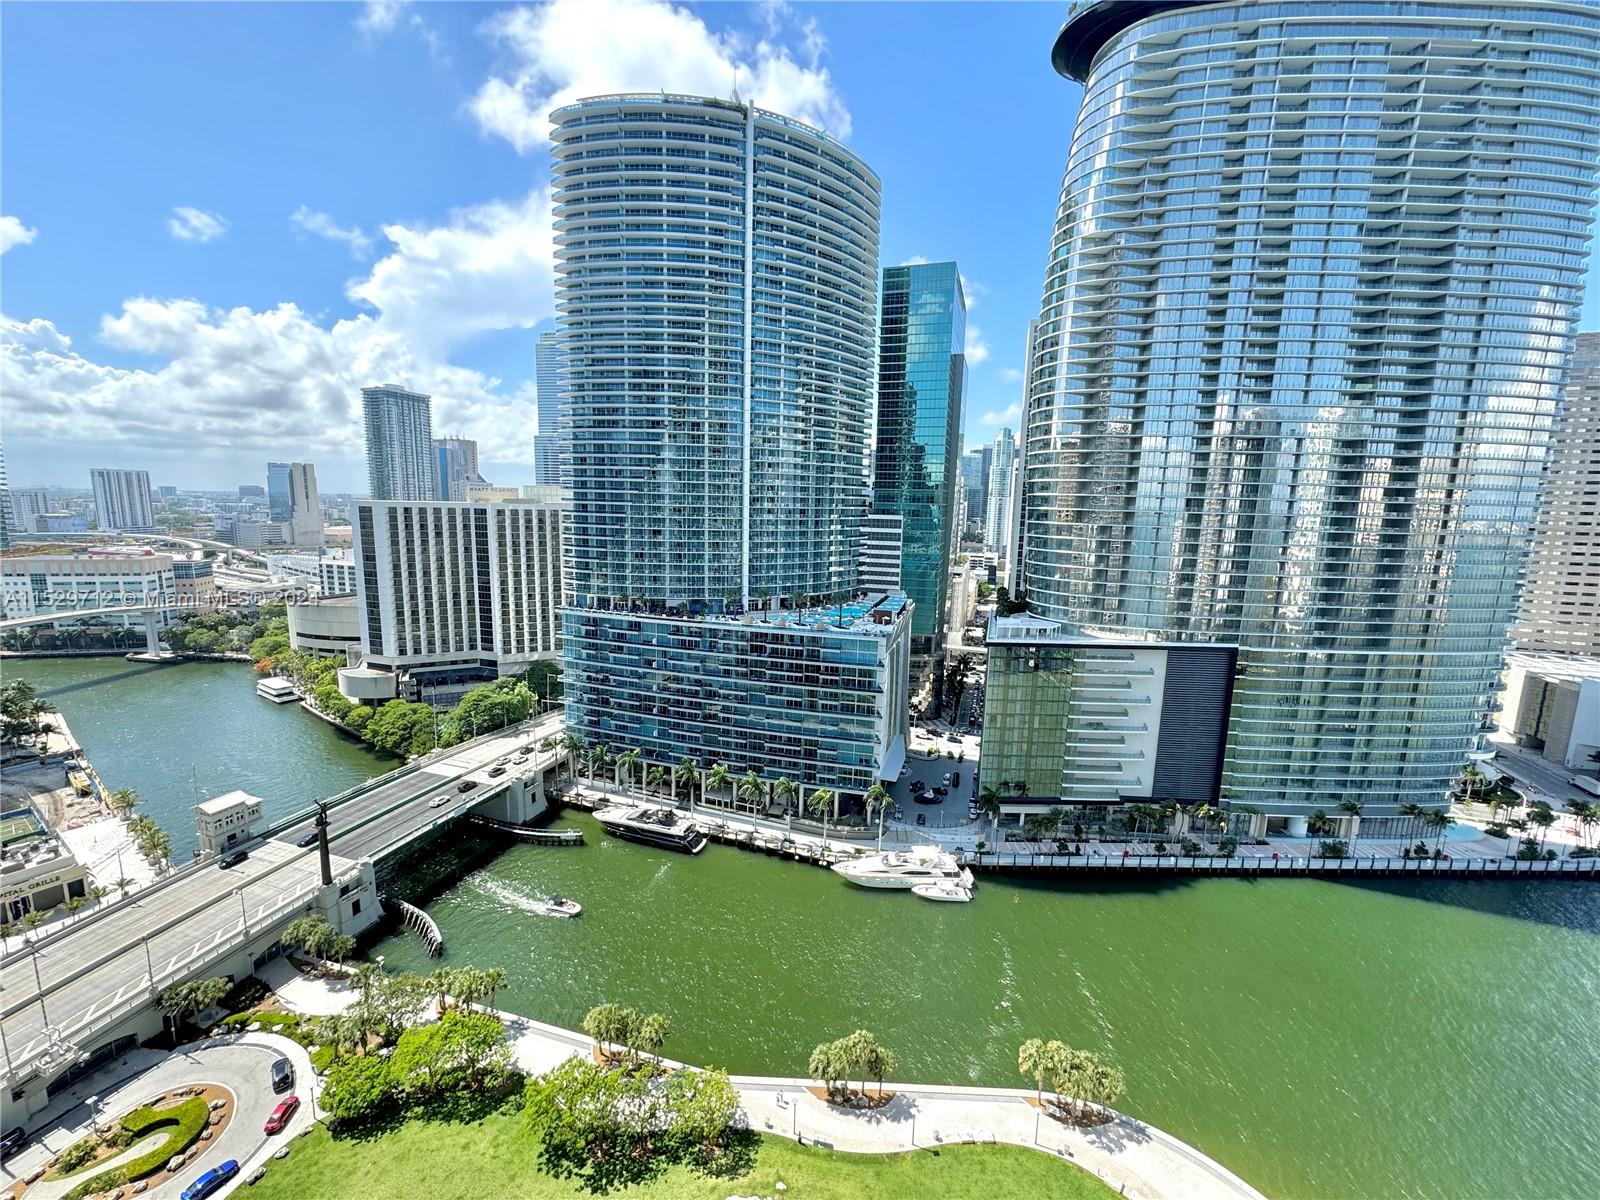 TURN KEY furnished unit! Condo in Brickell with breathtaking views from the balcony to the Miami River & Downtown Skyline. Fully furnished large 1 bed/1 bath unit at Icon Brickell Tower 1. Includes beautiful marble flooring all over. Stainless steel Subzero appliances with walk-in closet and washer & dryer inside the unit. There is one large couch and one queen size sofa bed in the living room. The large bathroom has double sink vanity and walk-in shower. Basic cable, internet, and water are included. Great location, in the heart of Downtown, walking distance to financial district, best restaurants, and shops. READY TO MOVE-IN!